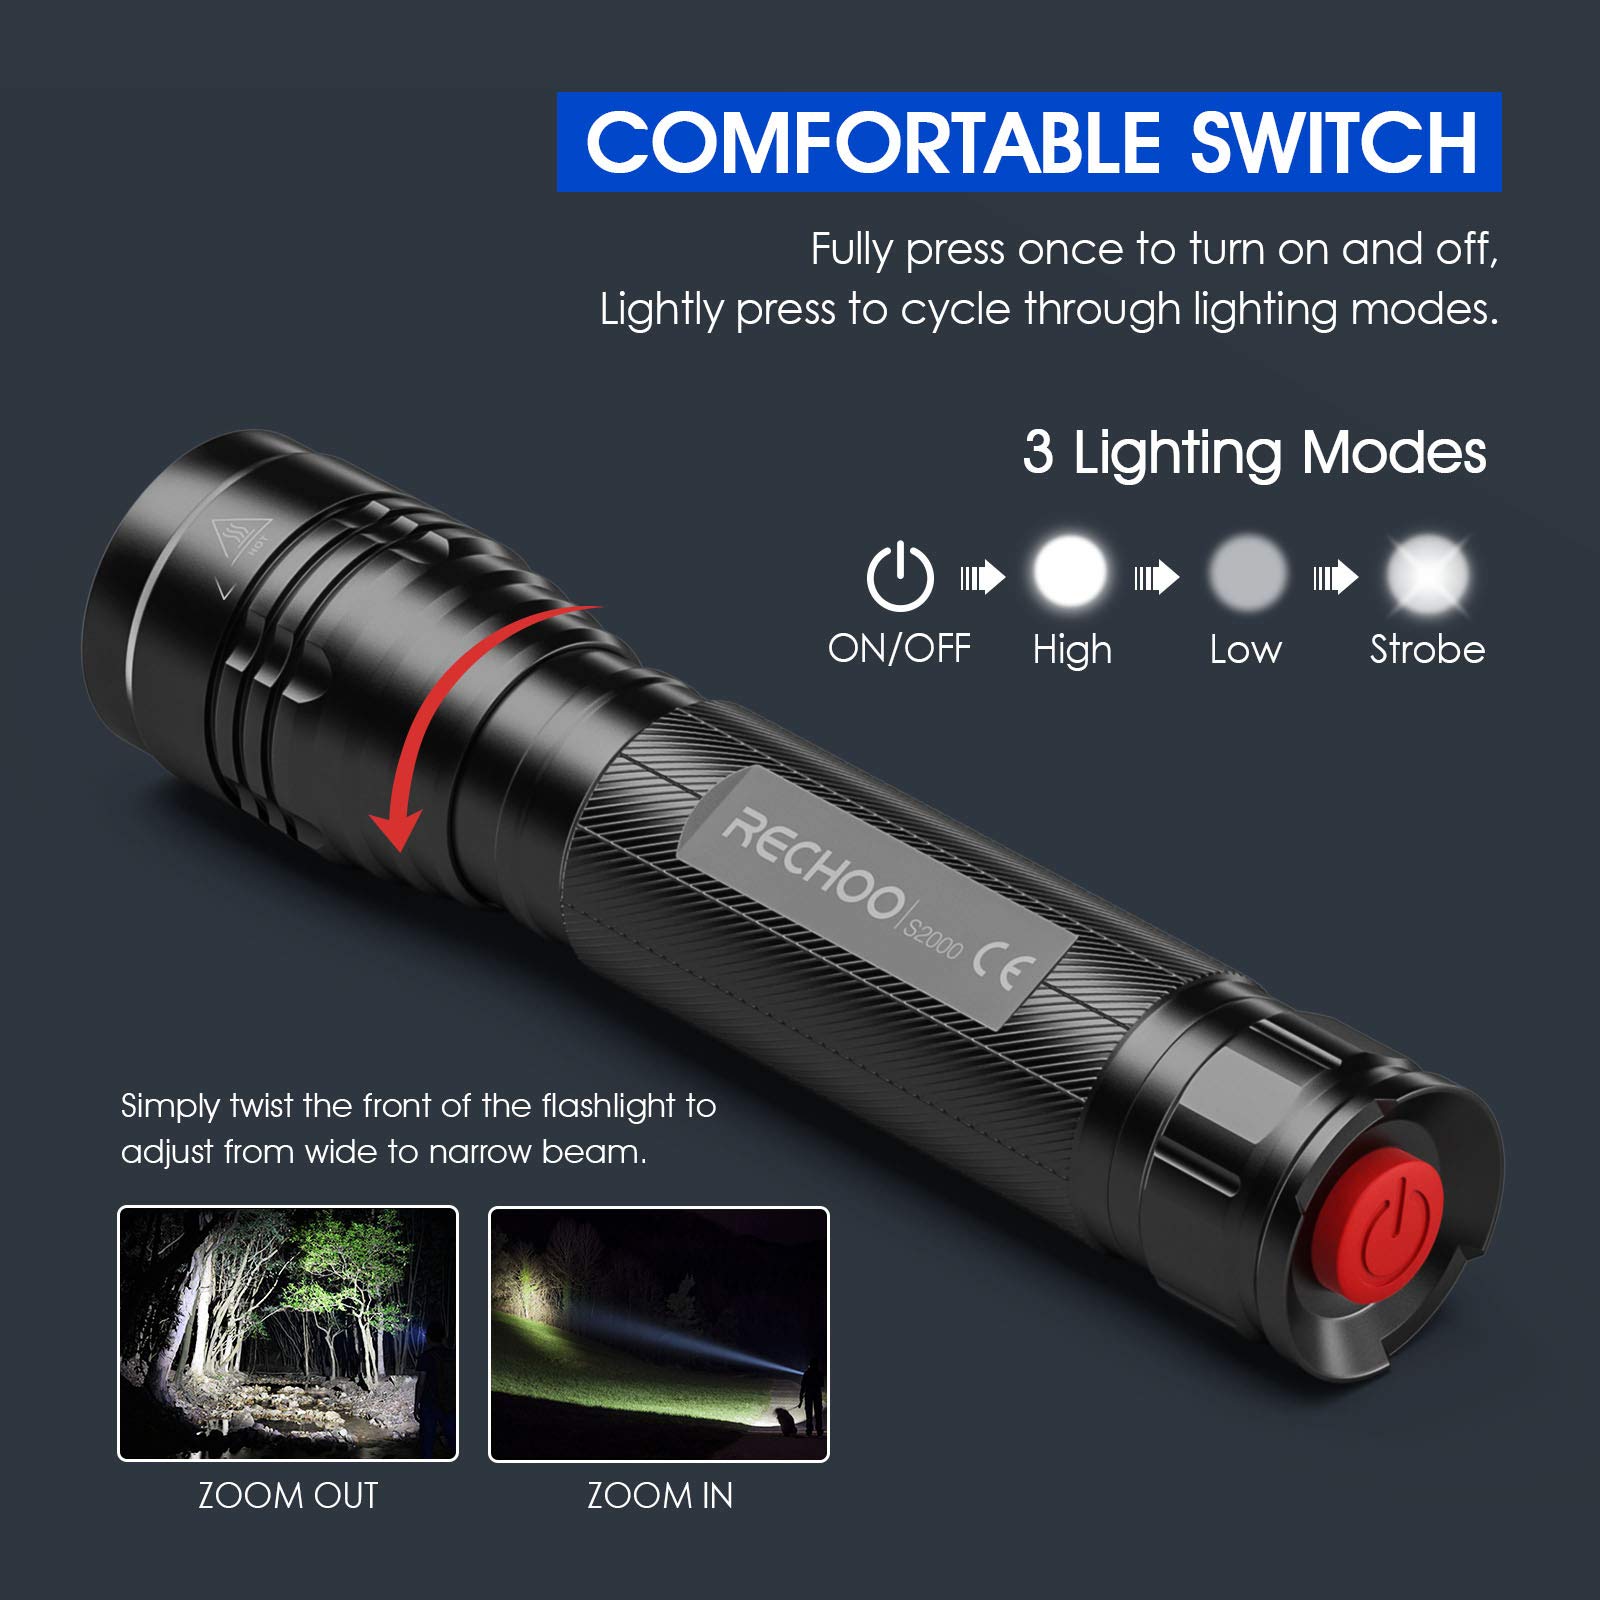 RECHOO Flashlights High Lumens 2 Pack, Super Bright 2000 Lumens Flash Light with 3 Modes, Zoomable, Water Resistant Led Flashlights for Home, Emergency, Camping, Hiking